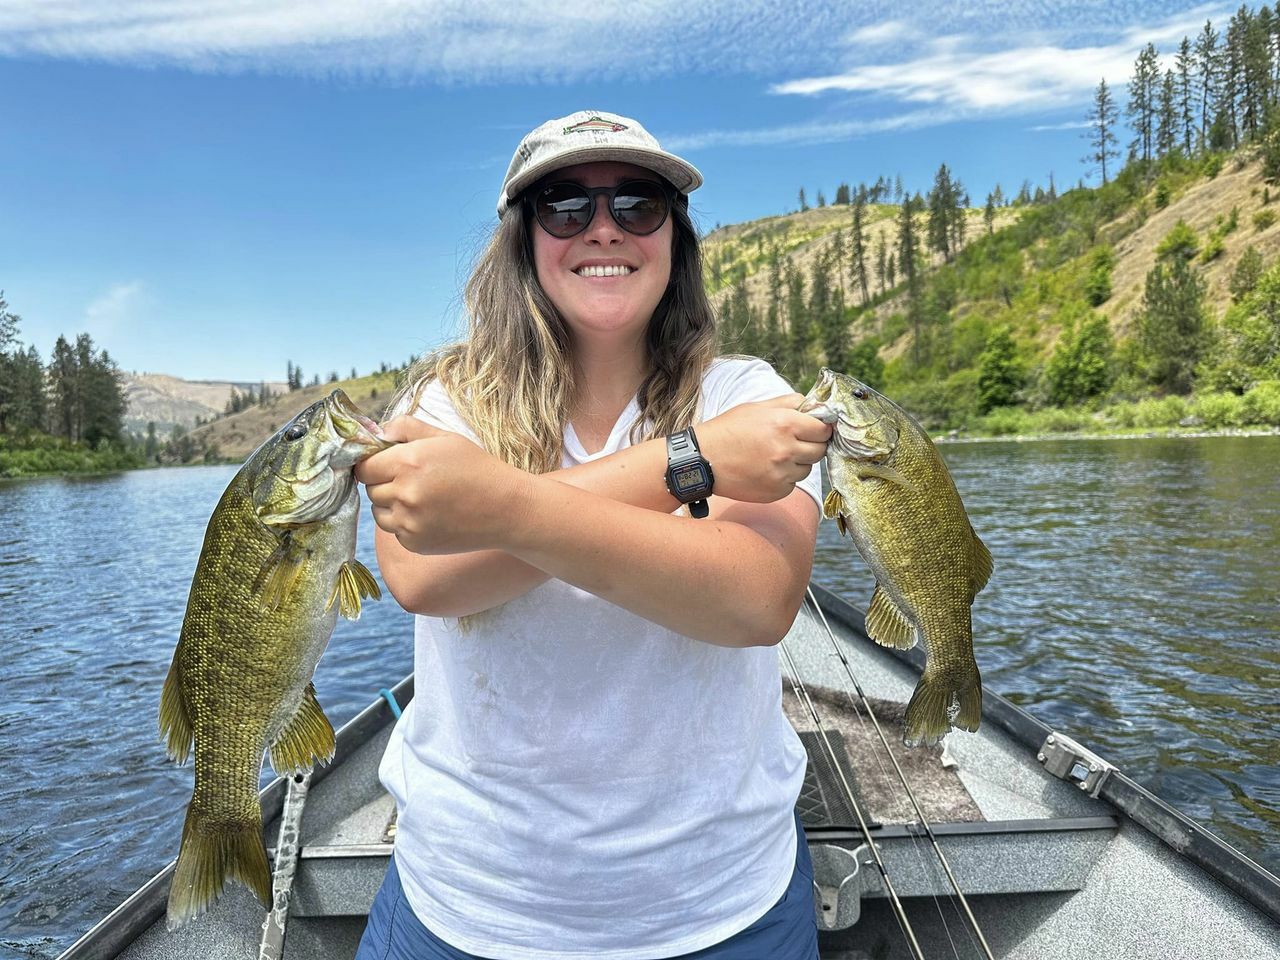 Smallmouth Bass fishing here on the Clearwater River in Idaho is always fun